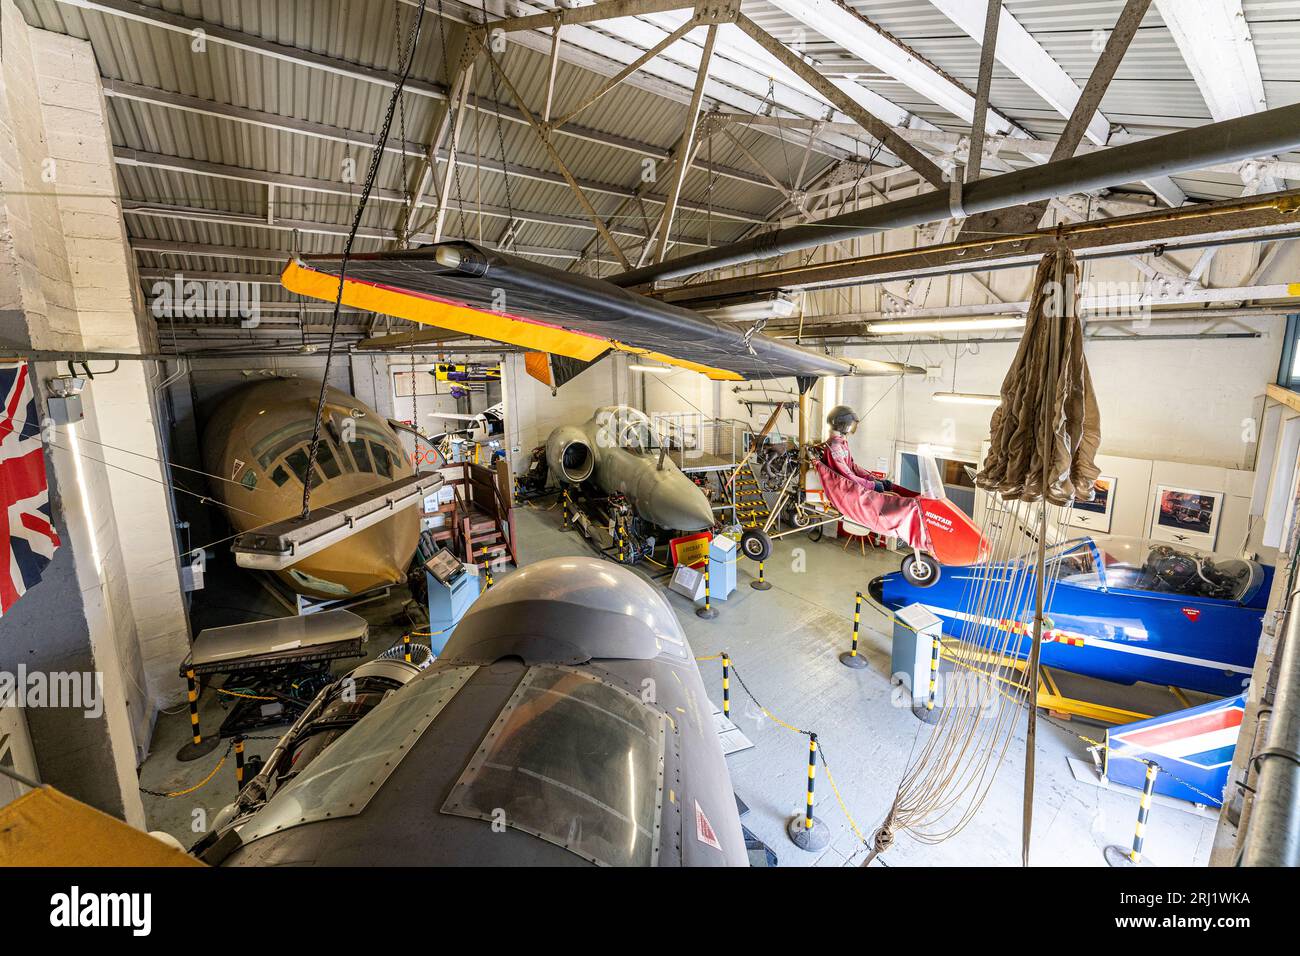 Interior, hanger at RAF Manston museum with a Pathfinder microlight hanging from ceiling, cockpit sections of a Victor bomber, Canberra and Buccaneer. Stock Photo